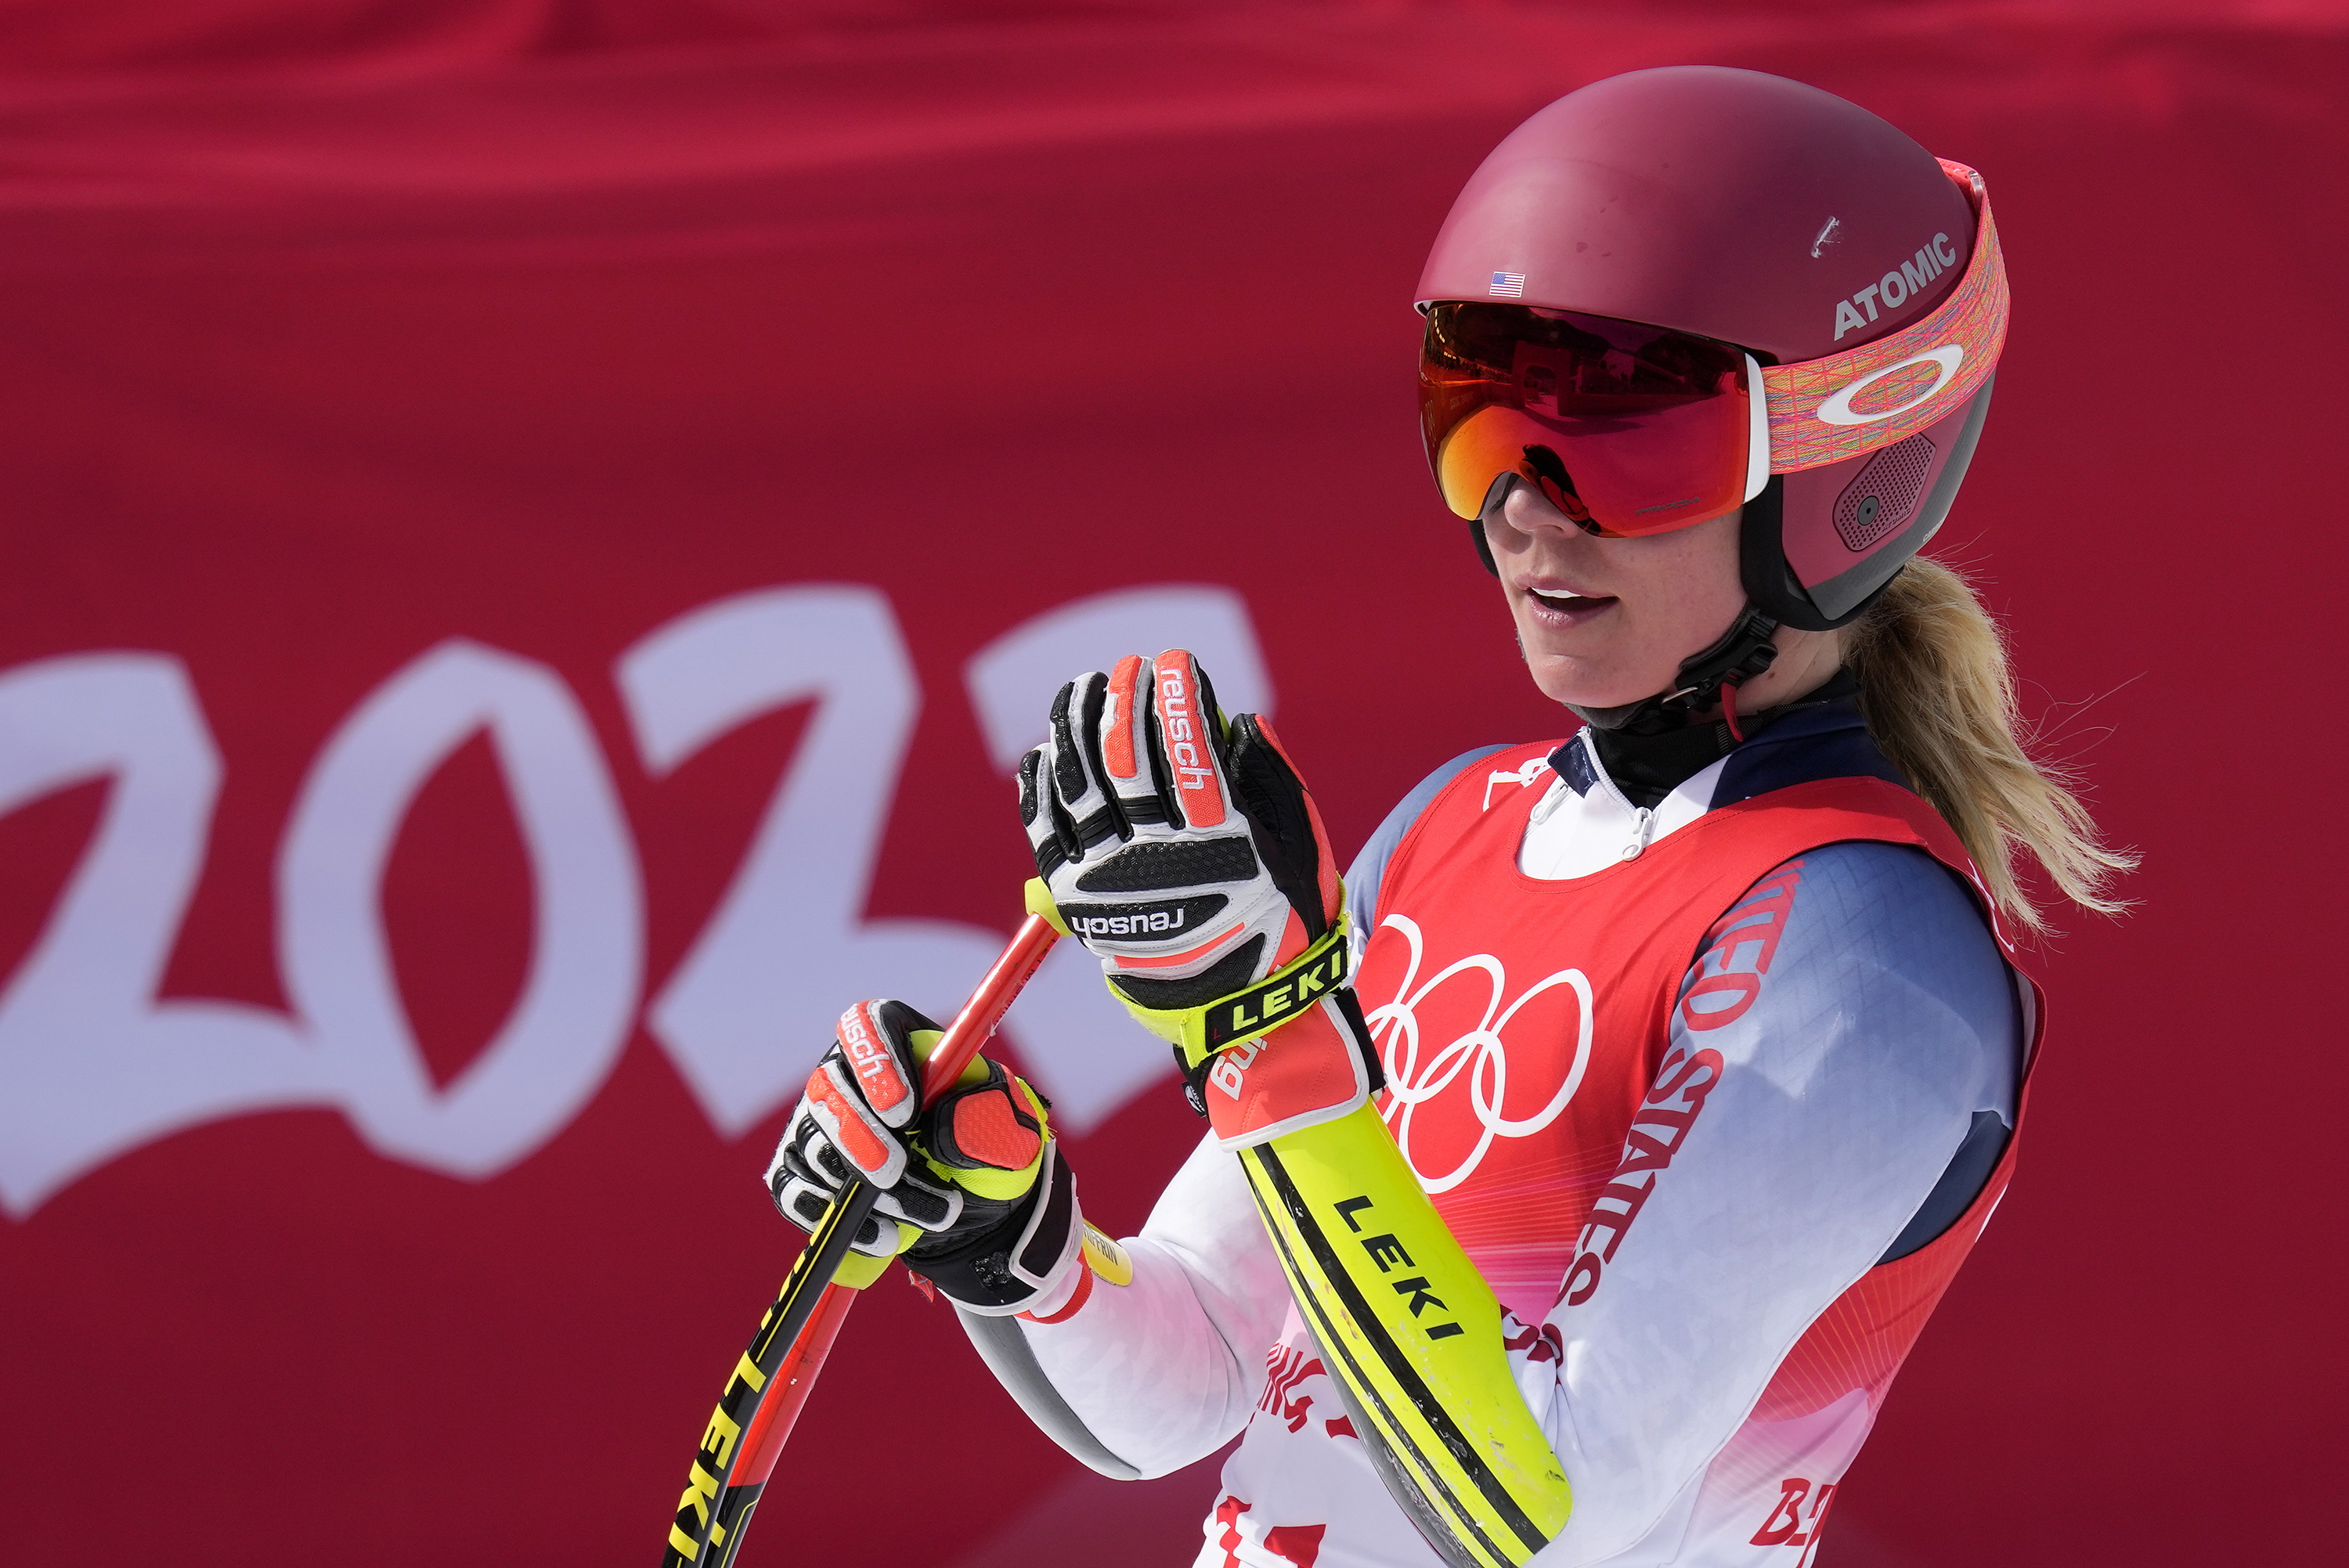 Team USA’s Mikaela Shiffrin reacts after finishing the women's super-G on Friday.